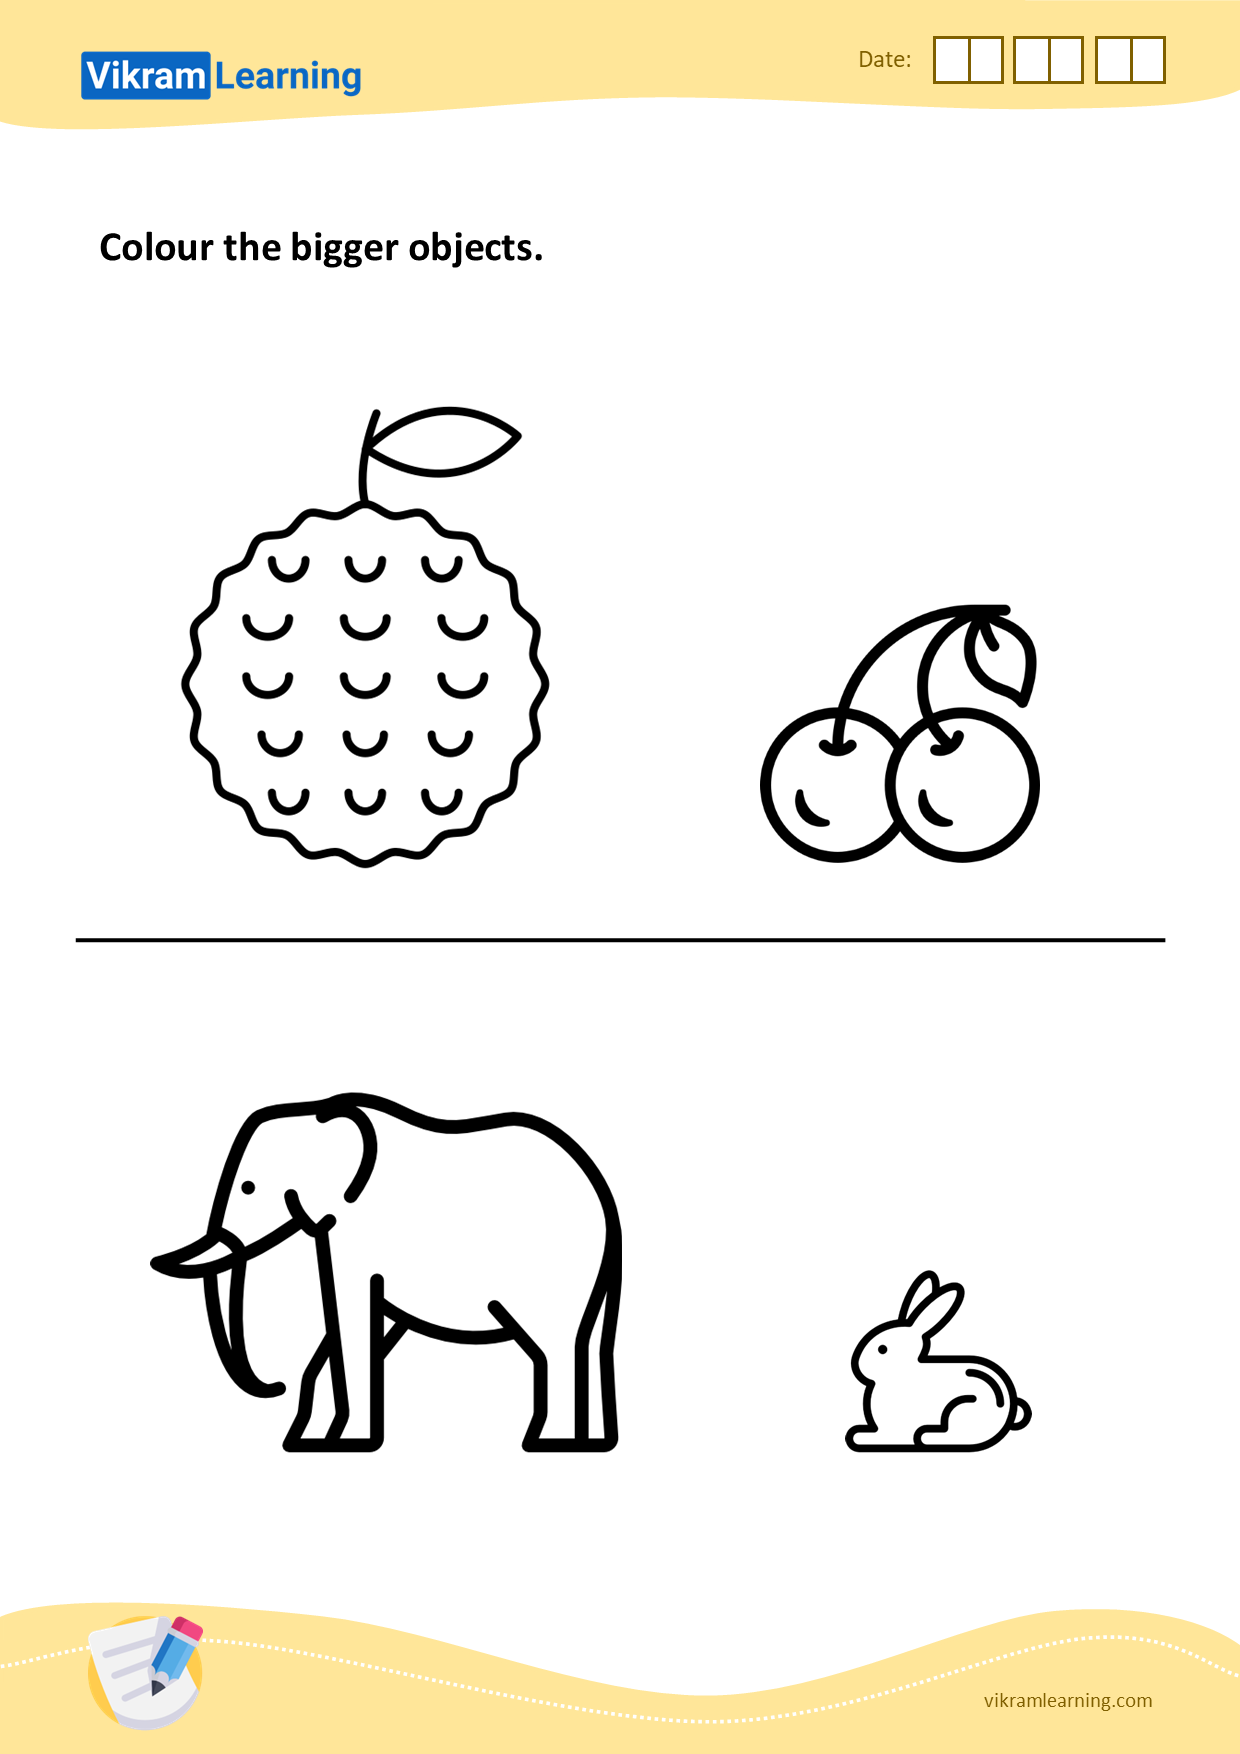 Download colour the bigger objects worksheets